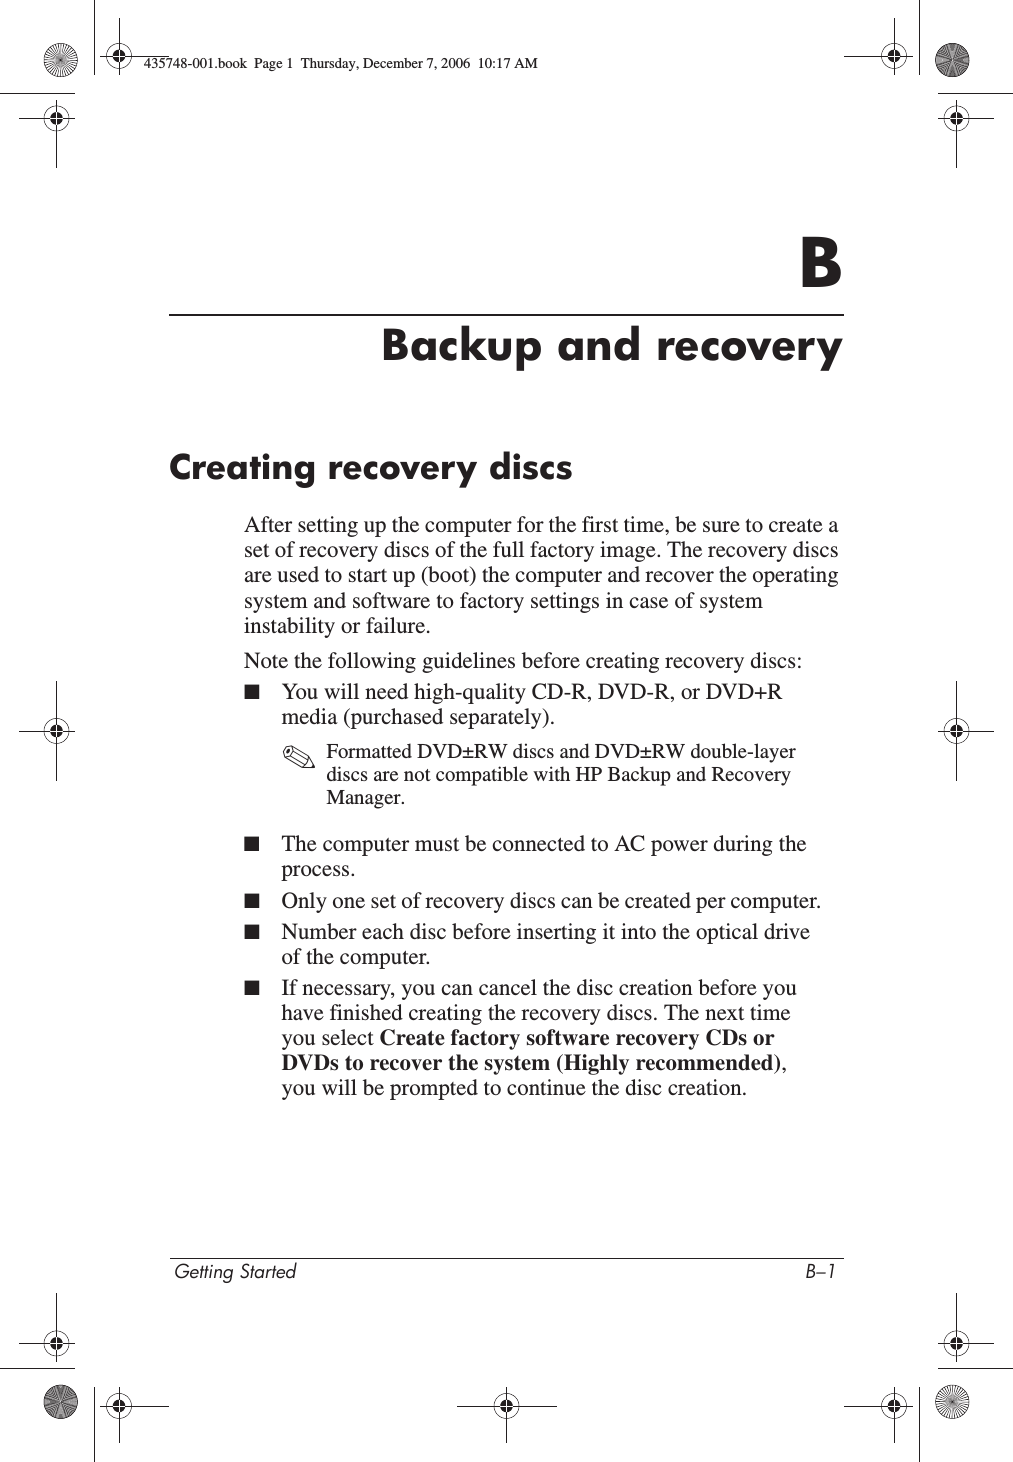 Getting Started B–1BBackup and recoveryCreating recovery discsAfter setting up the computer for the first time, be sure to create a set of recovery discs of the full factory image. The recovery discs are used to start up (boot) the computer and recover the operating system and software to factory settings in case of system instability or failure.Note the following guidelines before creating recovery discs:■You will need high-quality CD-R, DVD-R, or DVD+R media (purchased separately). ✎Formatted DVD±RW discs and DVD±RW double-layer discs are not compatible with HP Backup and Recovery Manager.■The computer must be connected to AC power during the process.■Only one set of recovery discs can be created per computer.■Number each disc before inserting it into the optical drive of the computer.■If necessary, you can cancel the disc creation before you have finished creating the recovery discs. The next time you select Create factory software recovery CDs or DVDs to recover the system (Highly recommended),you will be prompted to continue the disc creation.435748-001.book  Page 1  Thursday, December 7, 2006  10:17 AM